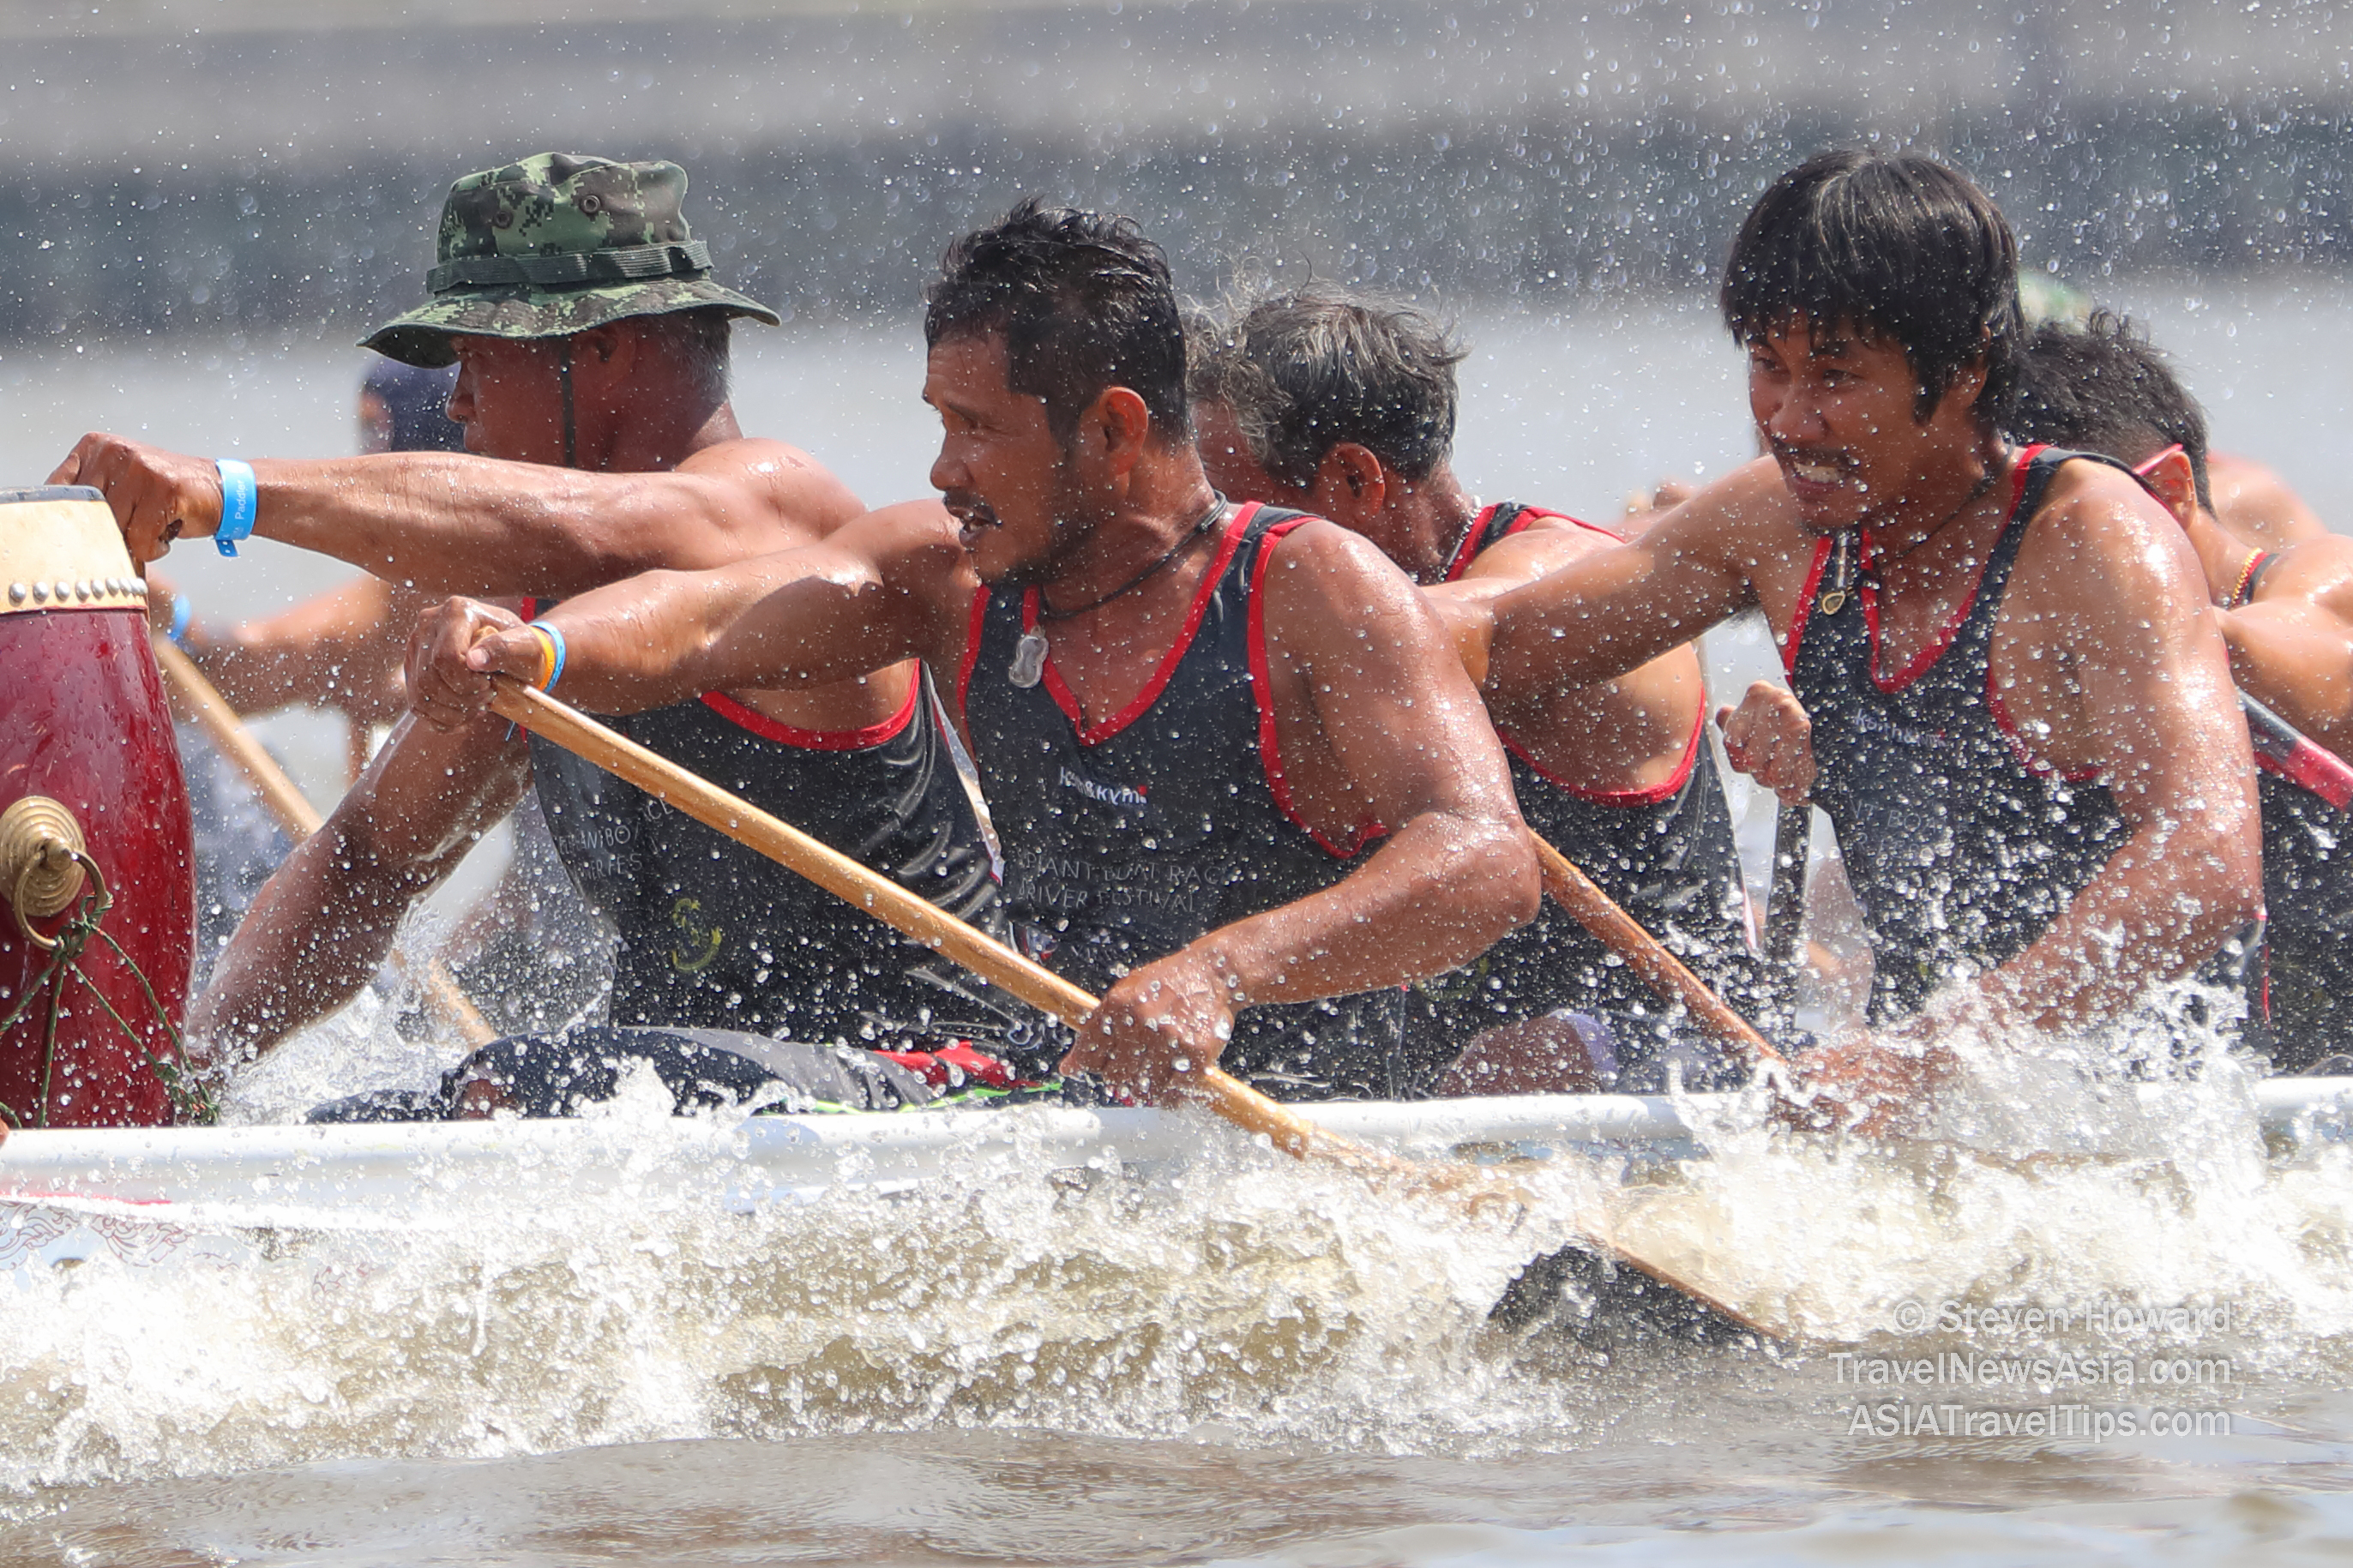 Thailand to host the IDBF World Dragon Boat Racing Championships from 20-25 August 2019. Picture by Steven Howard of TravelNewsAsia.com Click to enlarge.